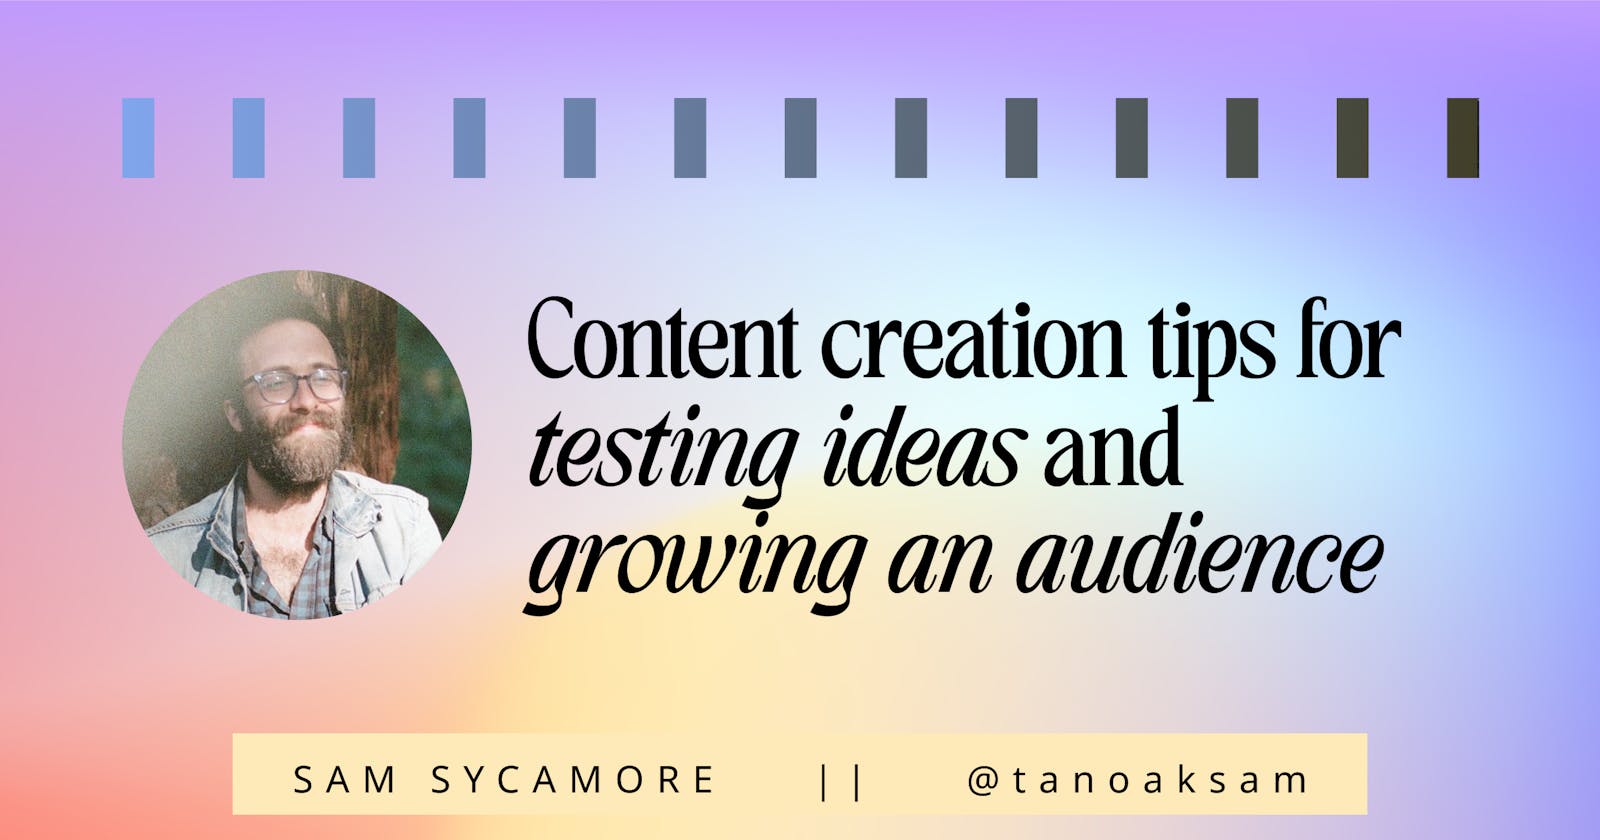 My Content Creation Strategy for Testing Ideas & Growing an Audience